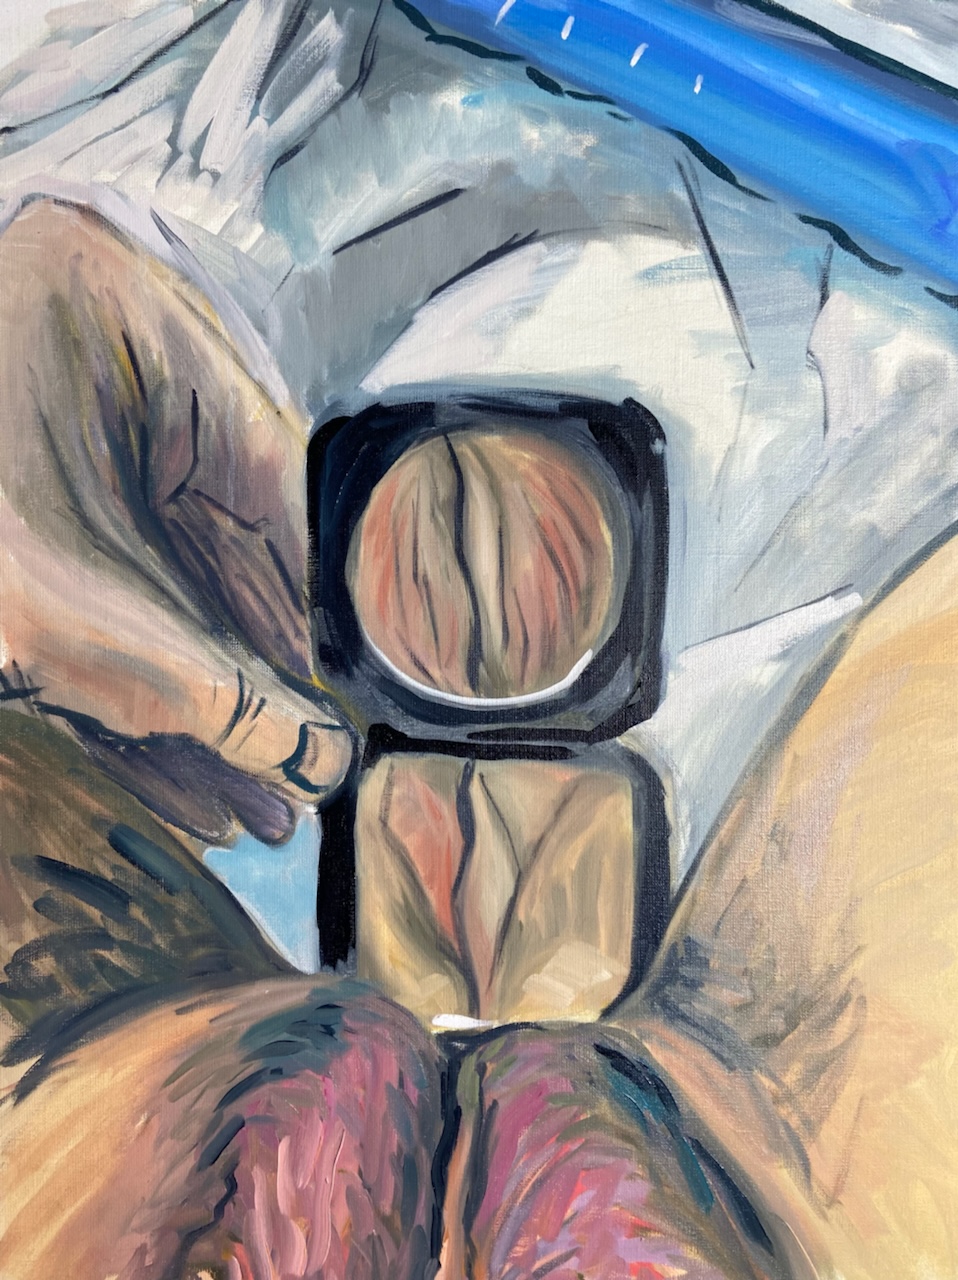 Painting by Molly Jae Vaughan of a hand holding a compact mirror between the subject's legs reflecting the subject's vagina